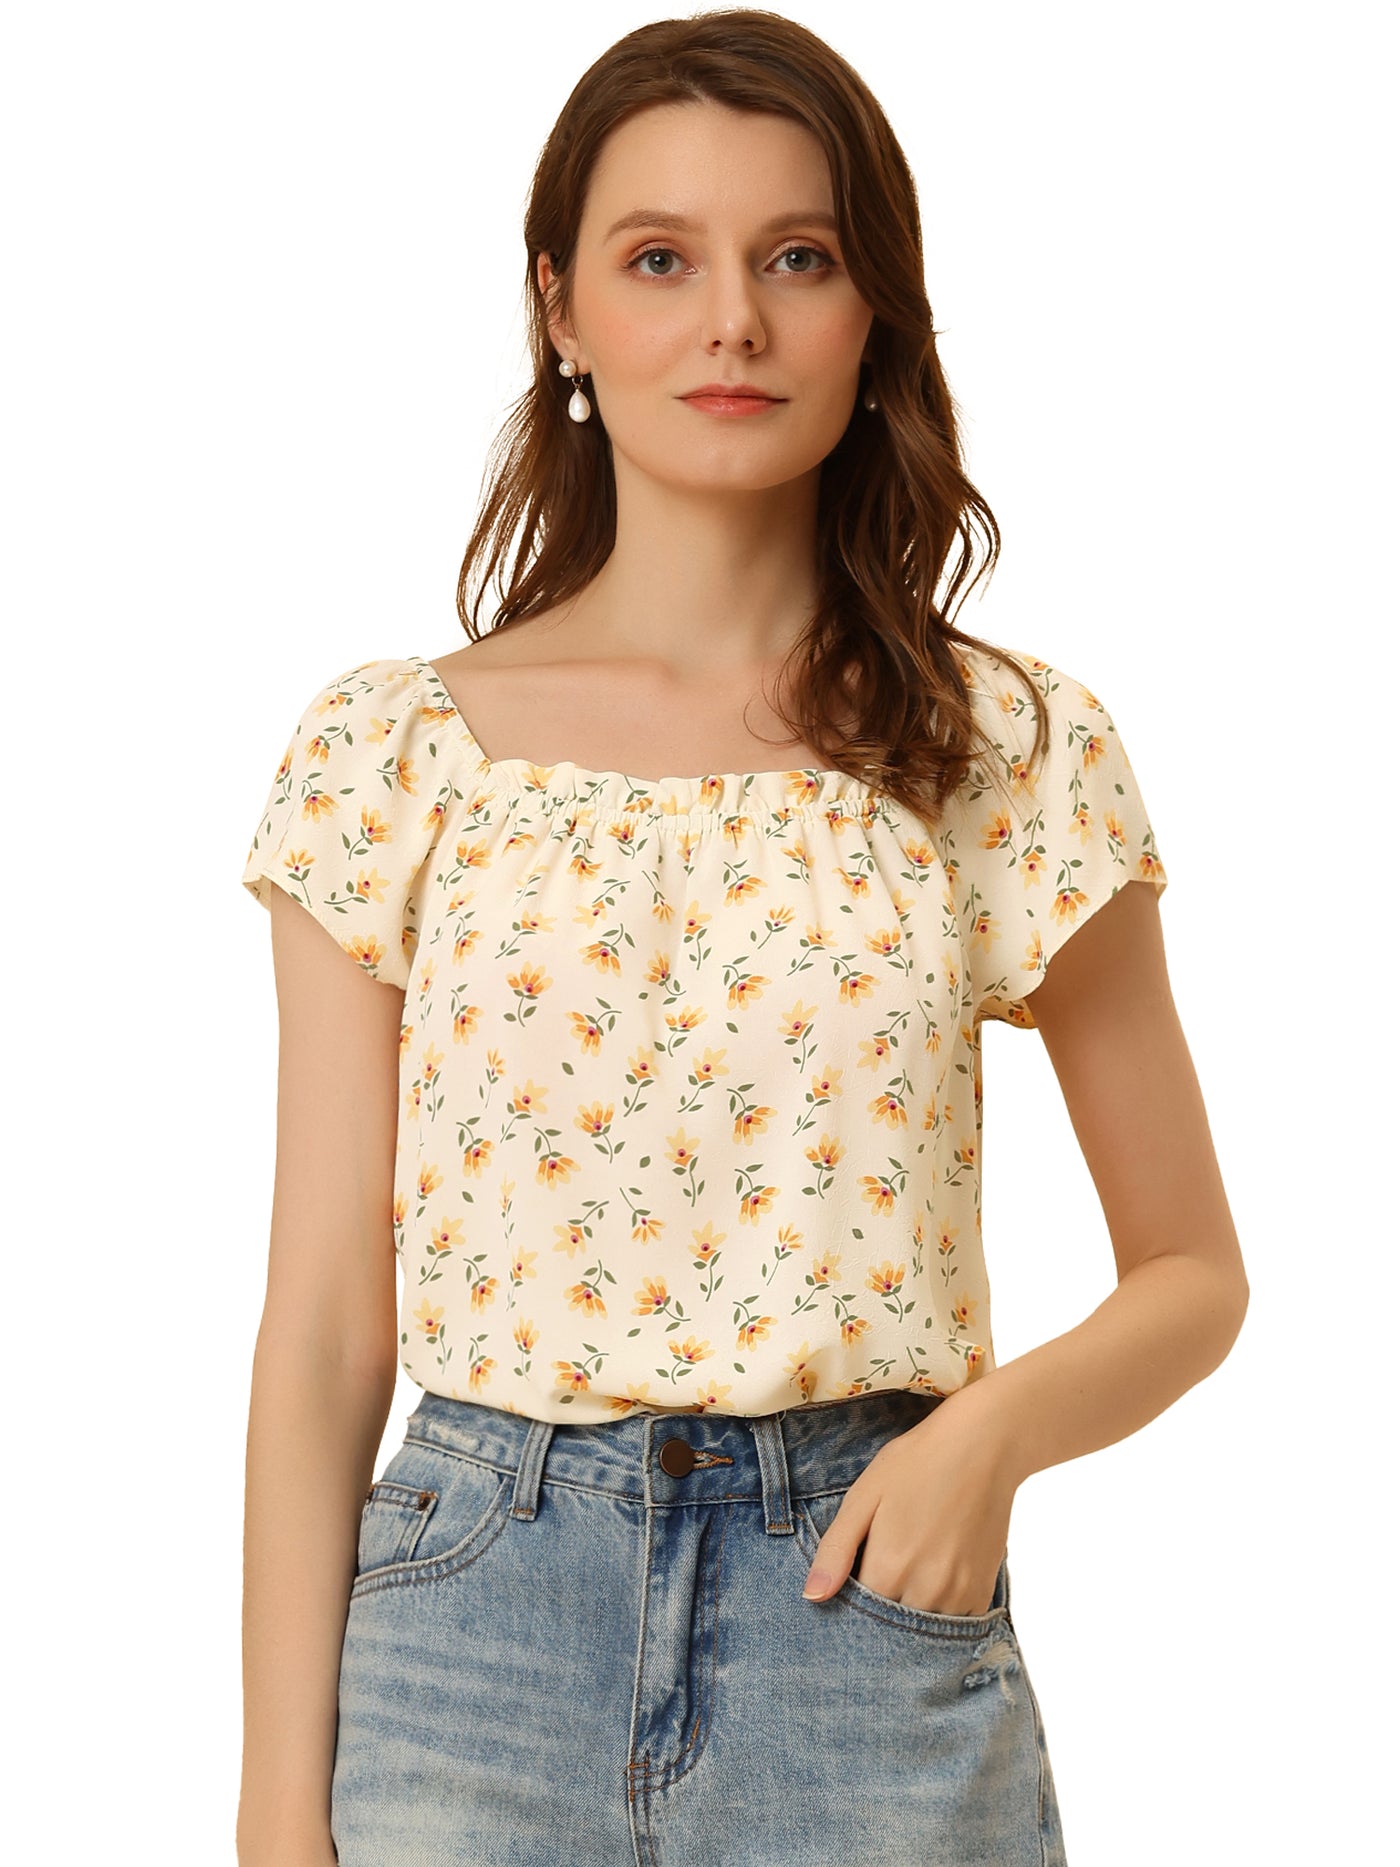 Allegra K Square Neck Casual Peasant Tops Cap Sleeve Floral Print Blouse